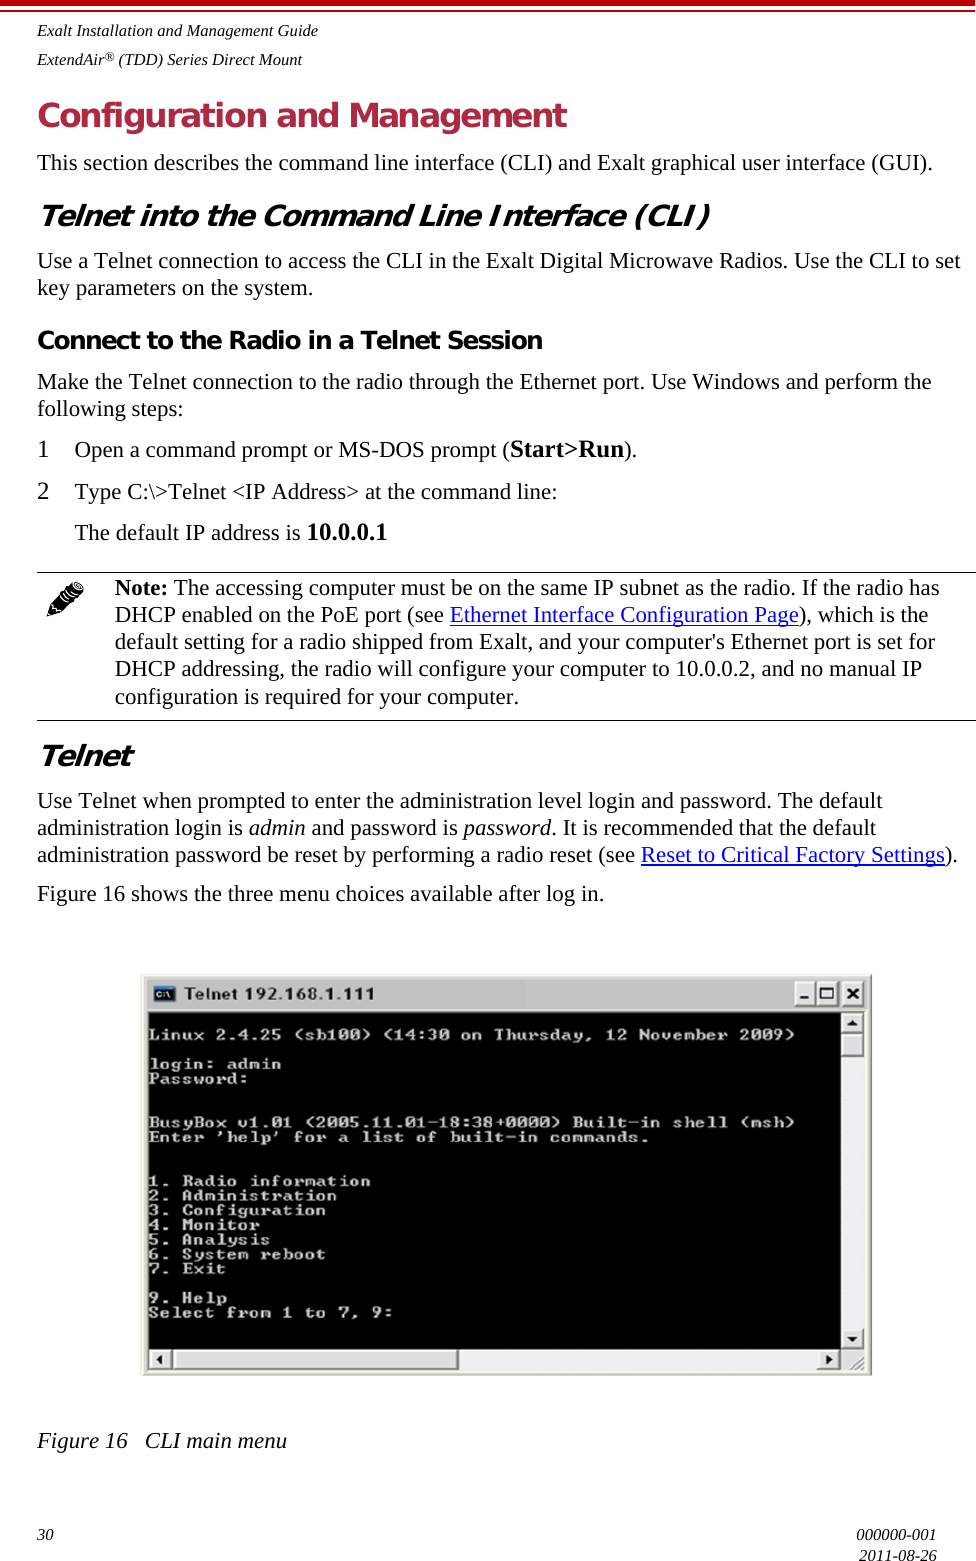 Exalt Installation and Management GuideExtendAir® (TDD) Series Direct Mount30 000000-0012011-08-26Configuration and ManagementThis section describes the command line interface (CLI) and Exalt graphical user interface (GUI).Telnet into the Command Line Interface (CLI)Use a Telnet connection to access the CLI in the Exalt Digital Microwave Radios. Use the CLI to set key parameters on the system.Connect to the Radio in a Telnet SessionMake the Telnet connection to the radio through the Ethernet port. Use Windows and perform the following steps:1Open a command prompt or MS-DOS prompt (Start&gt;Run).2Type C:\&gt;Telnet &lt;IP Address&gt; at the command line:The default IP address is 10.0.0.1TelnetUse Telnet when prompted to enter the administration level login and password. The default administration login is admin and password is password. It is recommended that the default administration password be reset by performing a radio reset (see Reset to Critical Factory Settings).Figure 16 shows the three menu choices available after log in.Figure 16   CLI main menuNote: The accessing computer must be on the same IP subnet as the radio. If the radio has DHCP enabled on the PoE port (see Ethernet Interface Configuration Page), which is the default setting for a radio shipped from Exalt, and your computer&apos;s Ethernet port is set for DHCP addressing, the radio will configure your computer to 10.0.0.2, and no manual IP configuration is required for your computer.